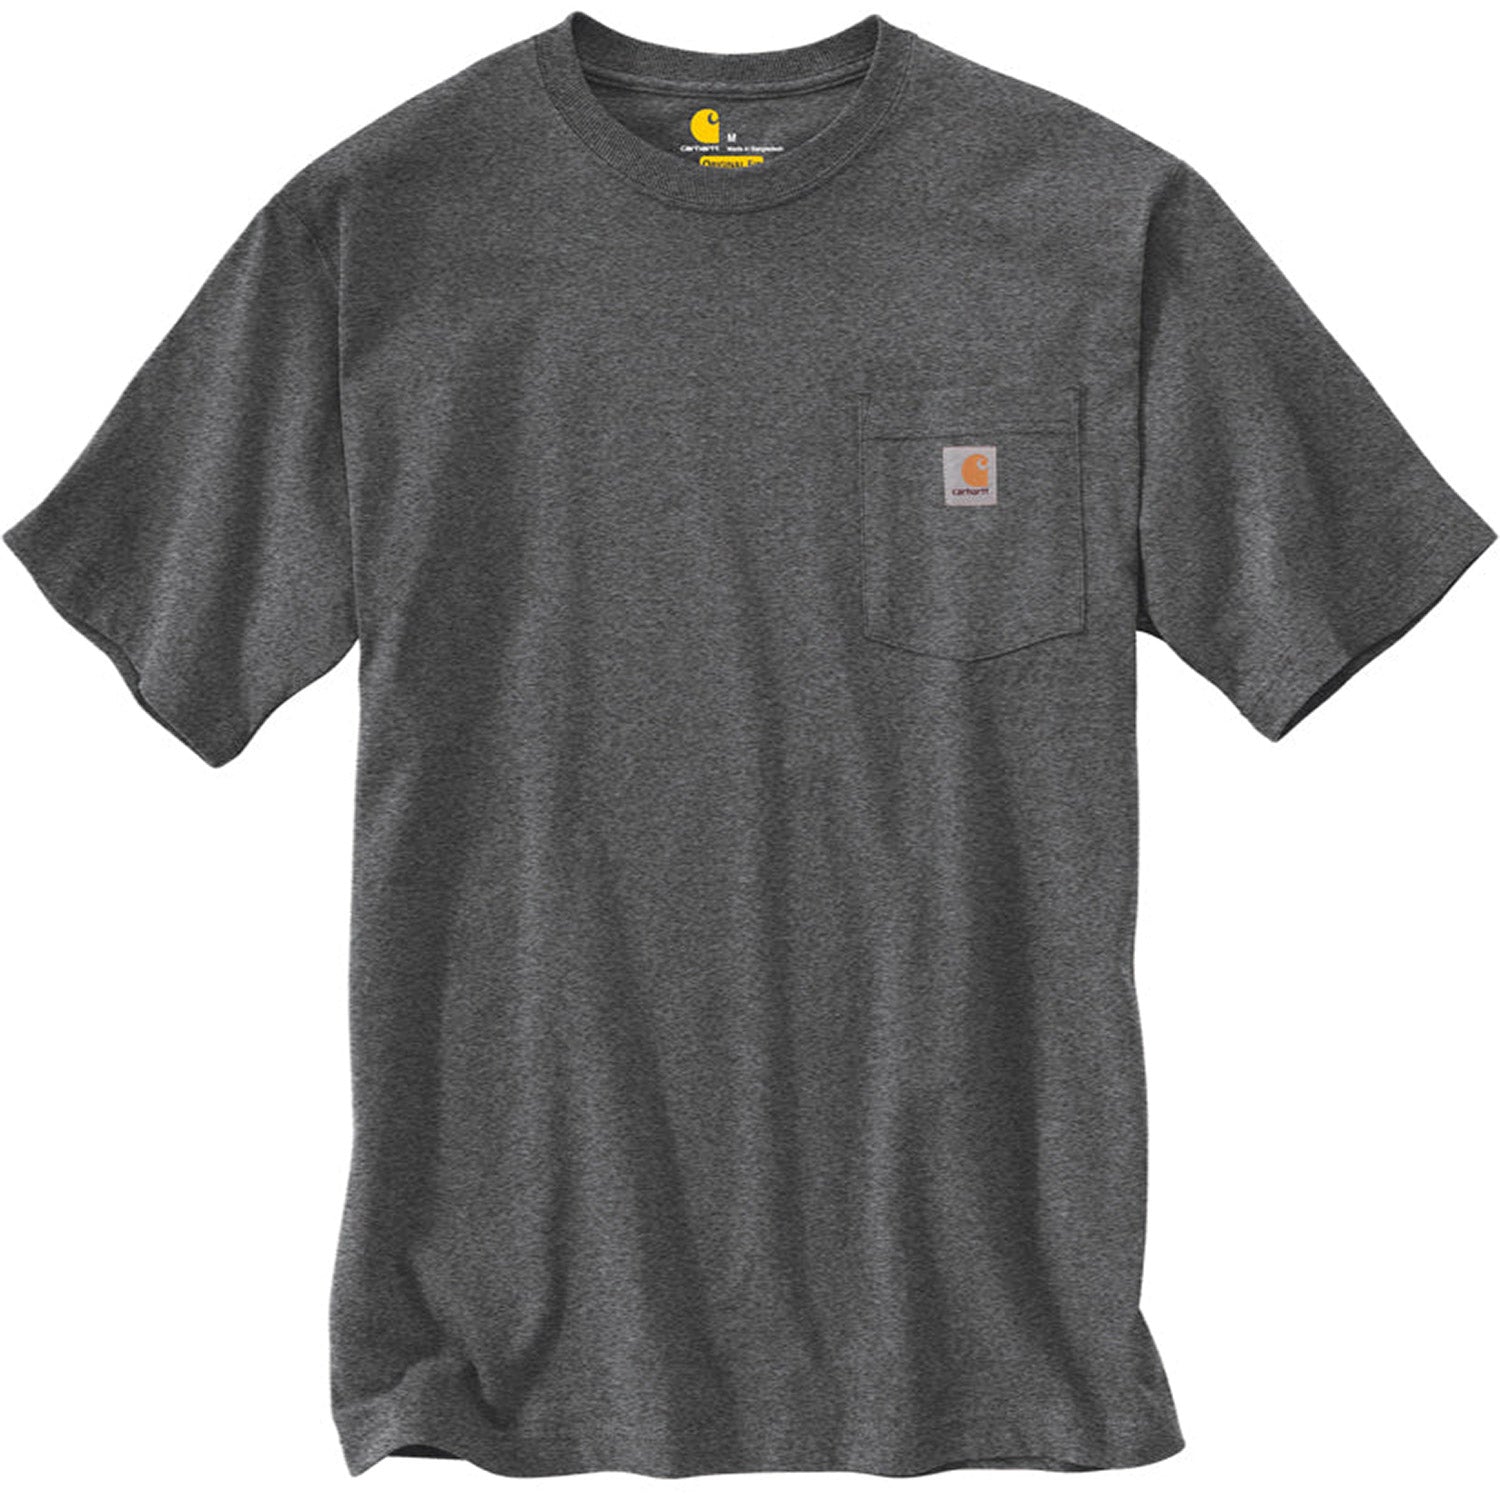 K87 - Loose Fit Heavyweight Pocket Tee, Carbon Heather